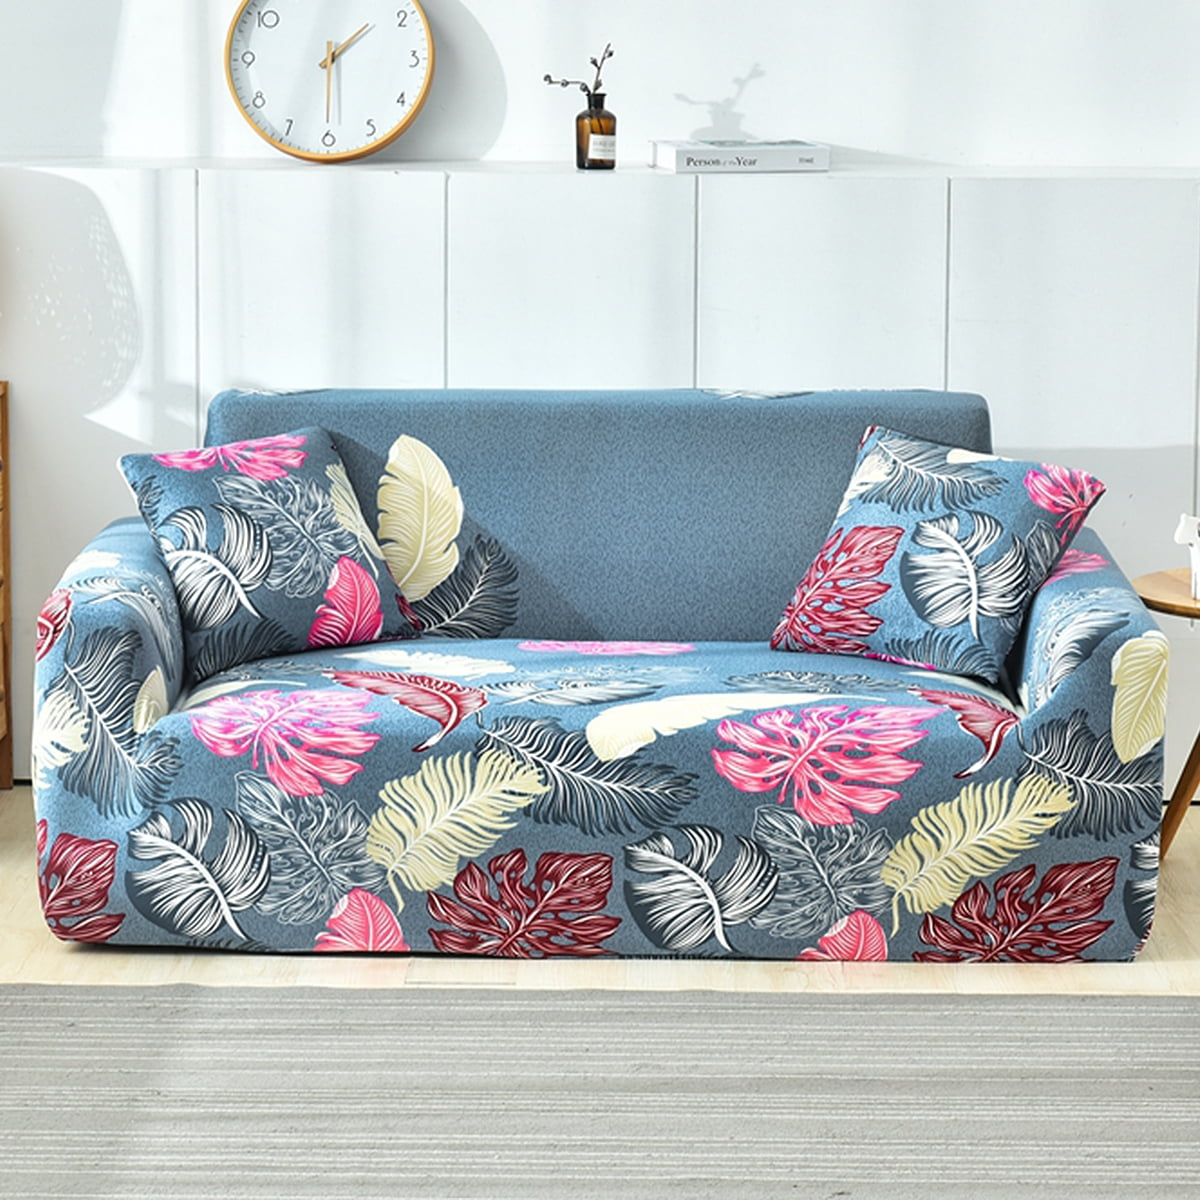 1-4 Seater Floral Stretch Sofa Cover Couch Lounge Recliner Slipcover Protector 